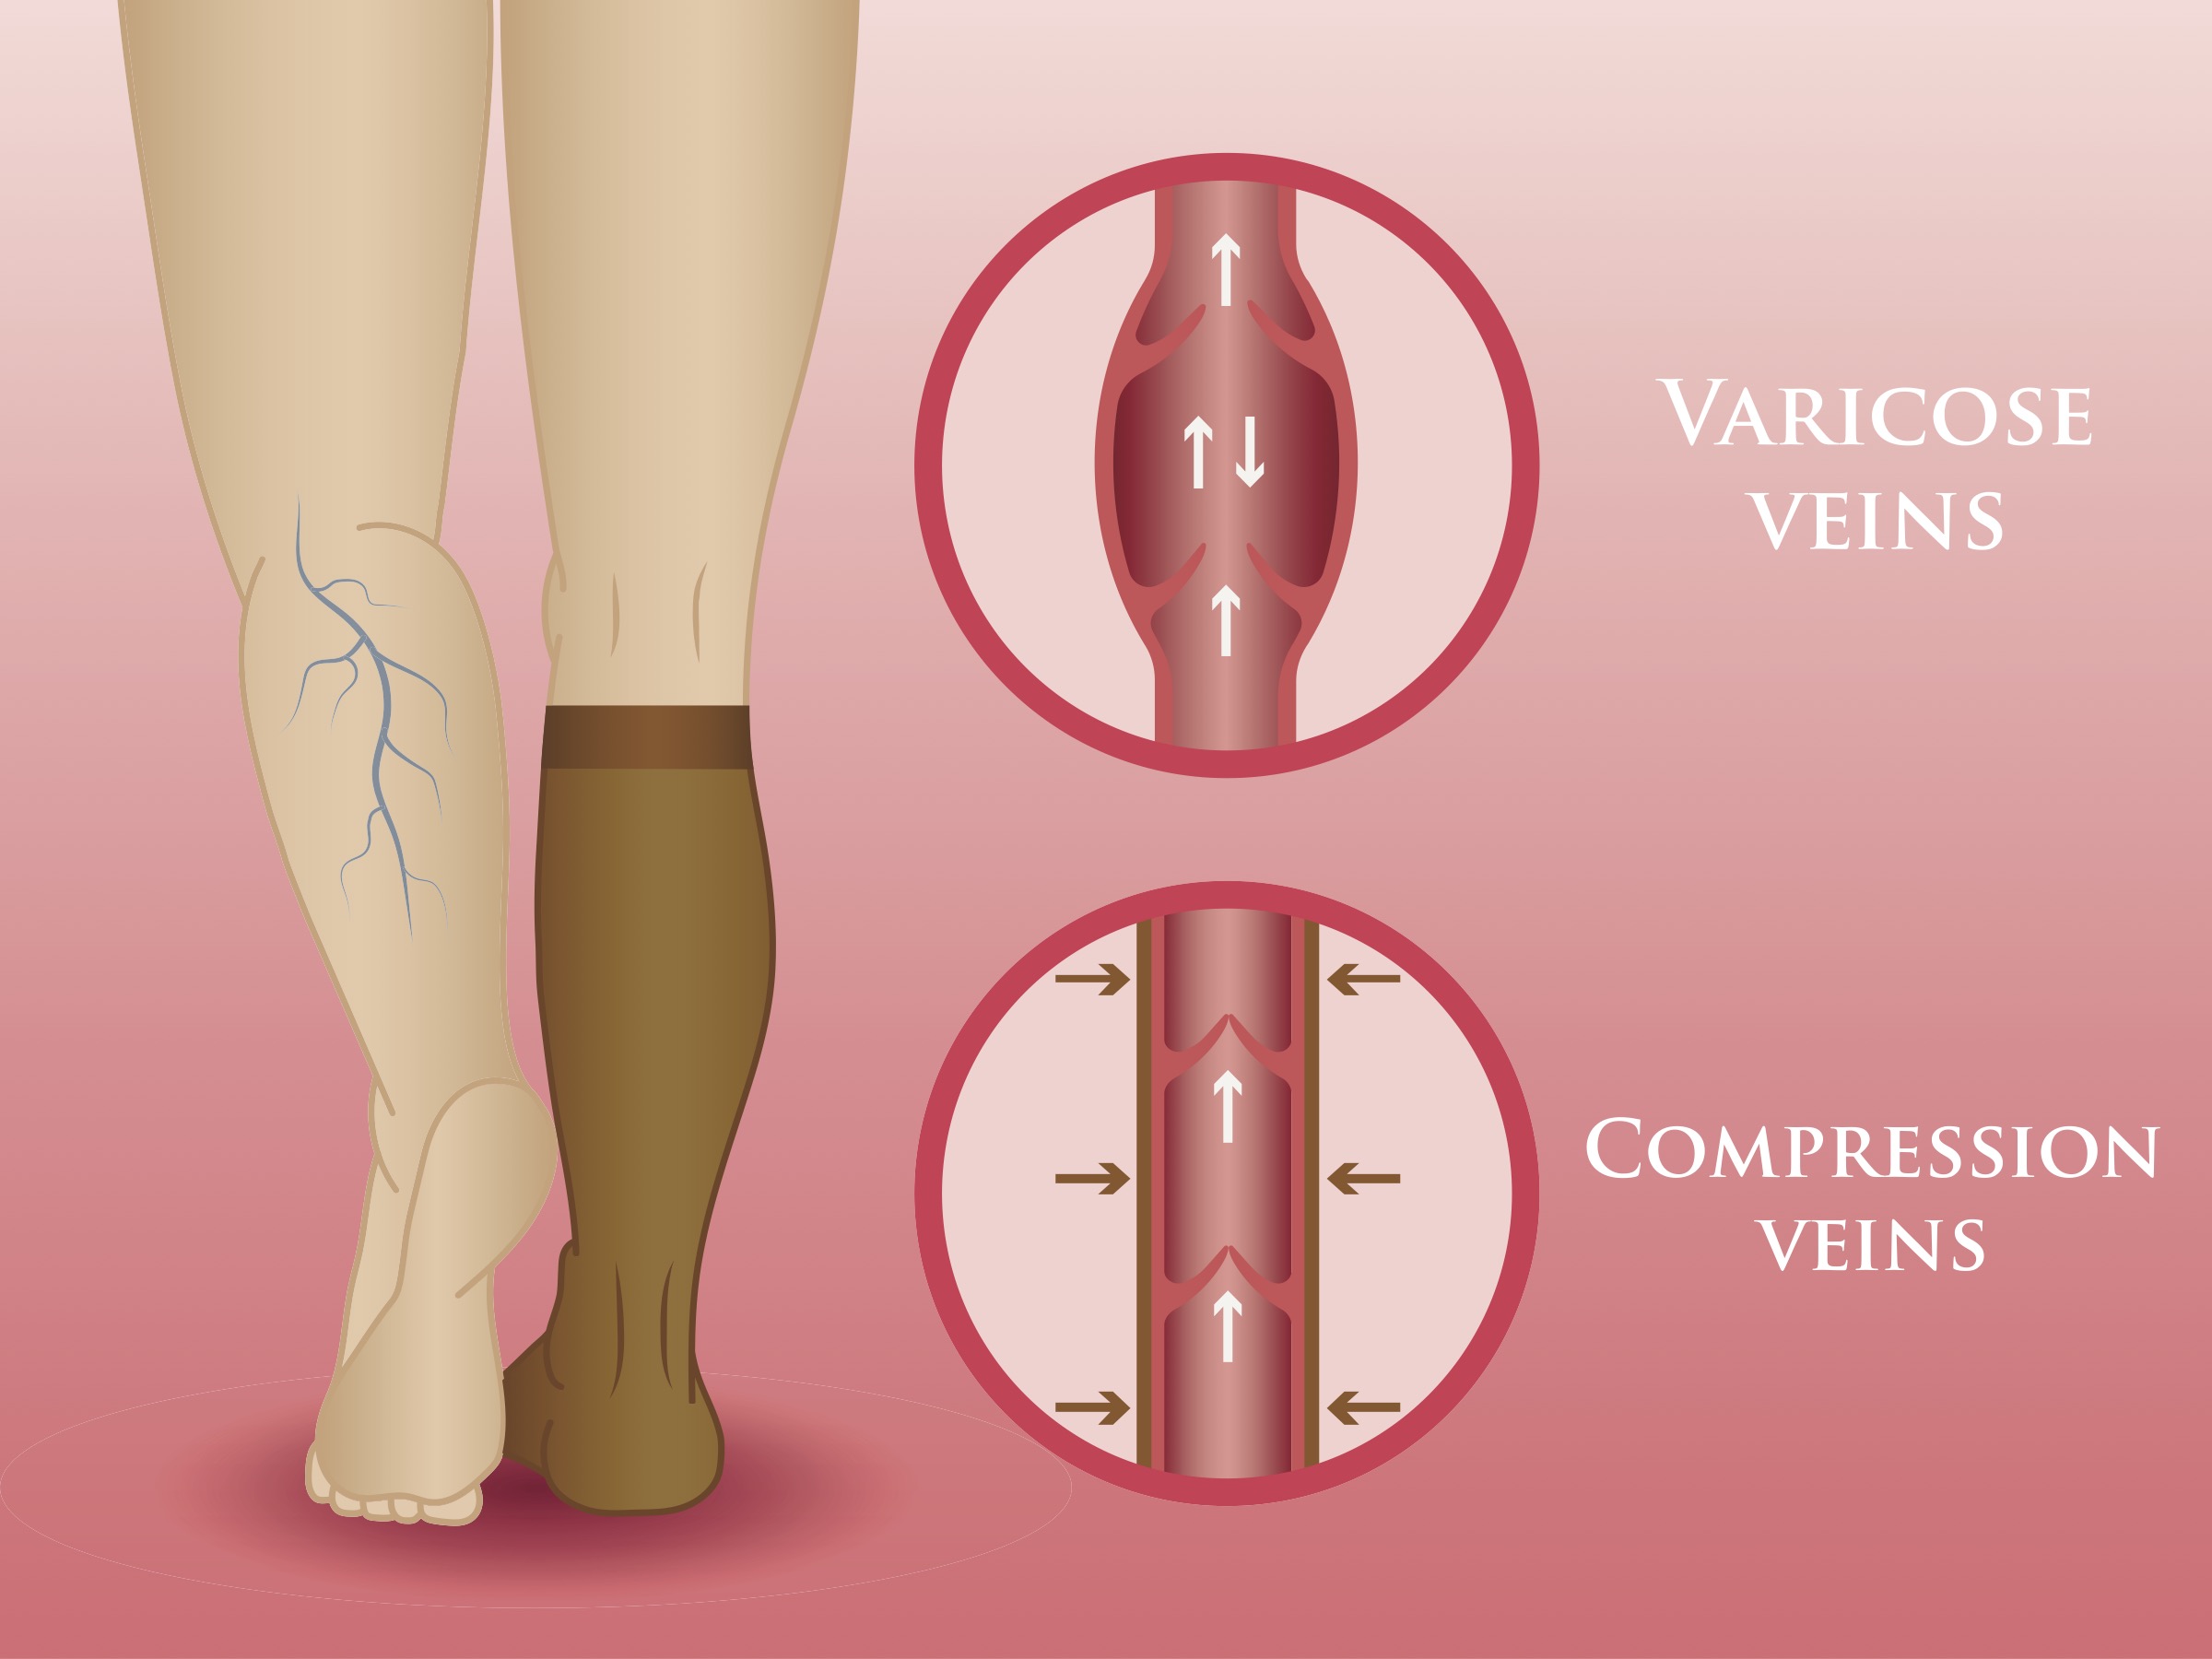 Illustration Showing One Leg with Varicose Veins and One Leg Supported by Wearing Compression Stockings.